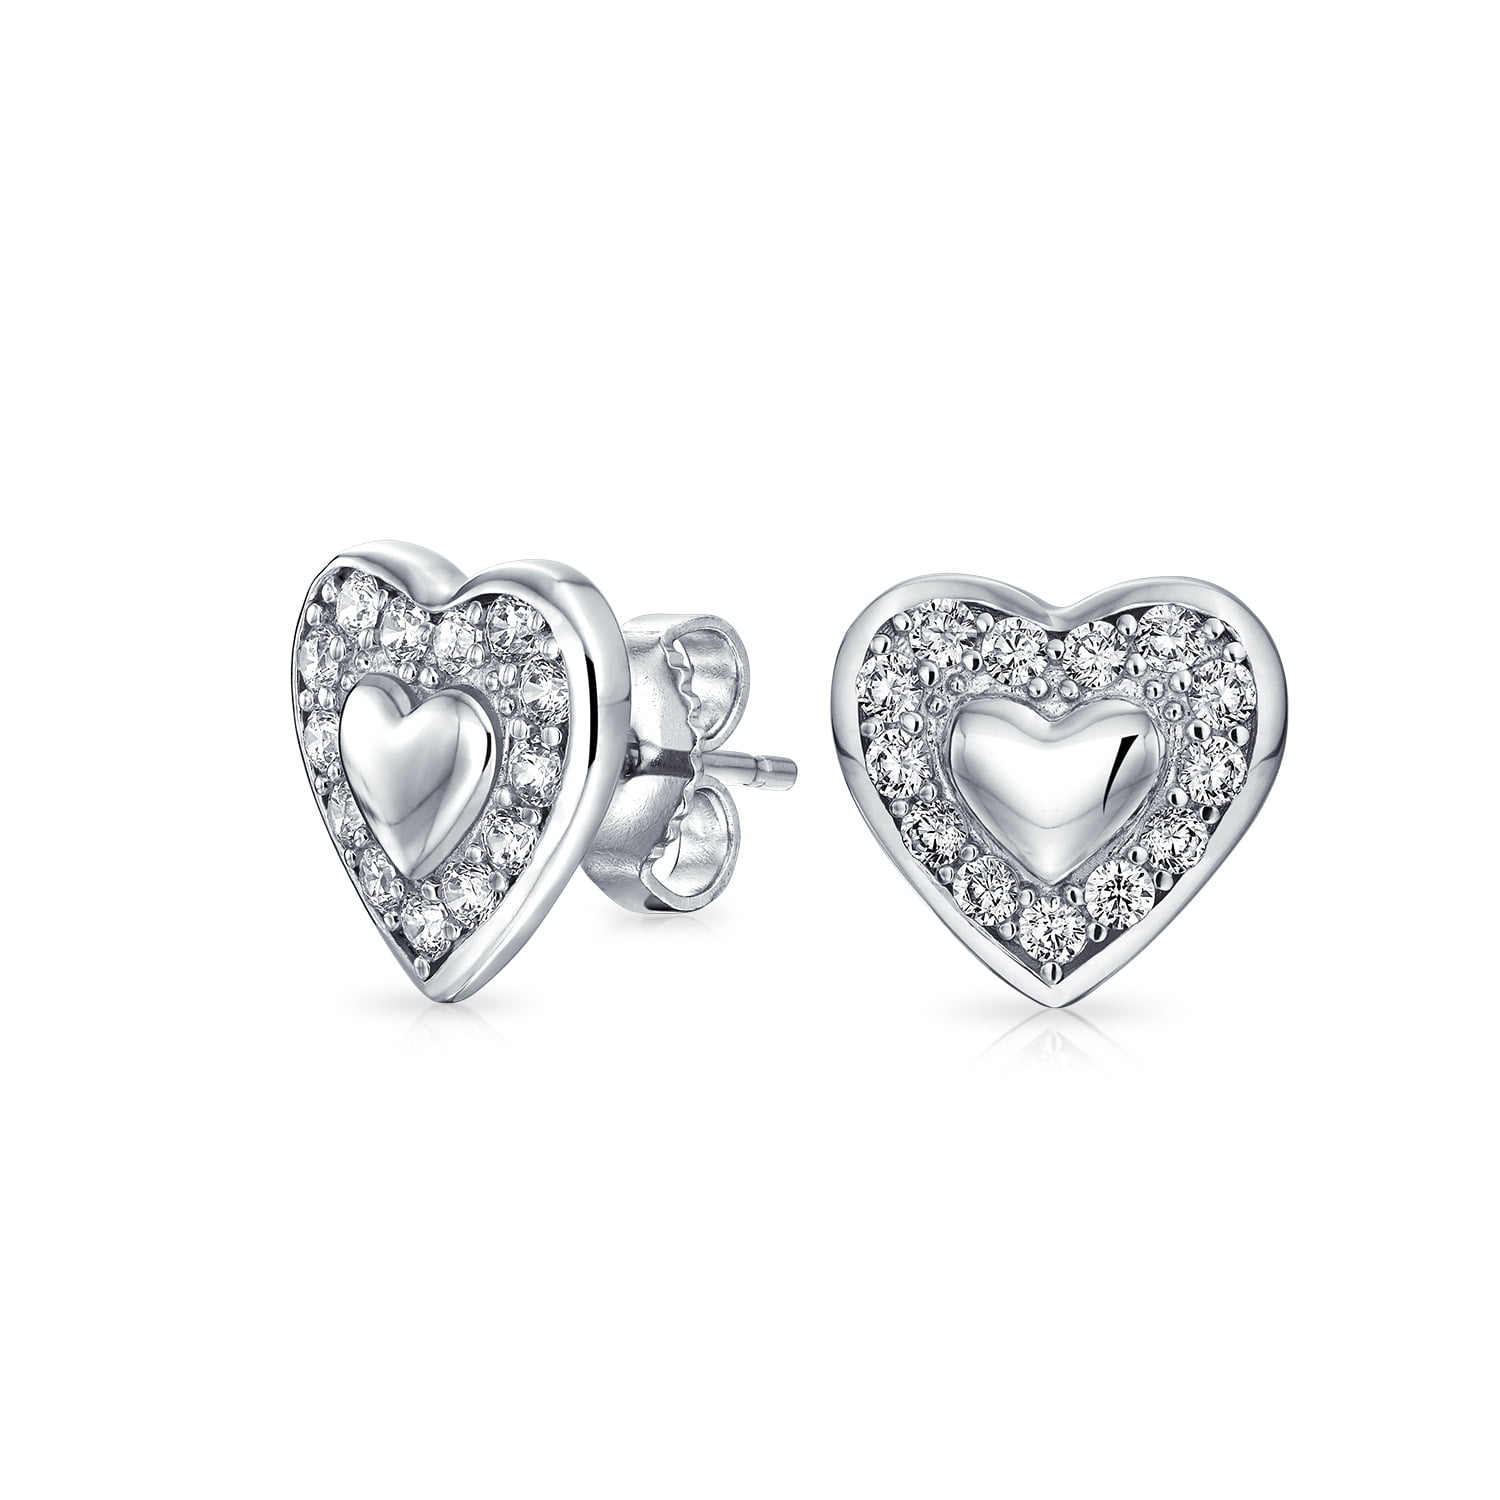 Azaggi 925 Sterling Silver Stud Earrings Cute Solid Handcrafted Love Heart Delicate and Pretty Stud Earrings.These Ear Studs are the perfect jewelry gift for women suitable for all occasions 